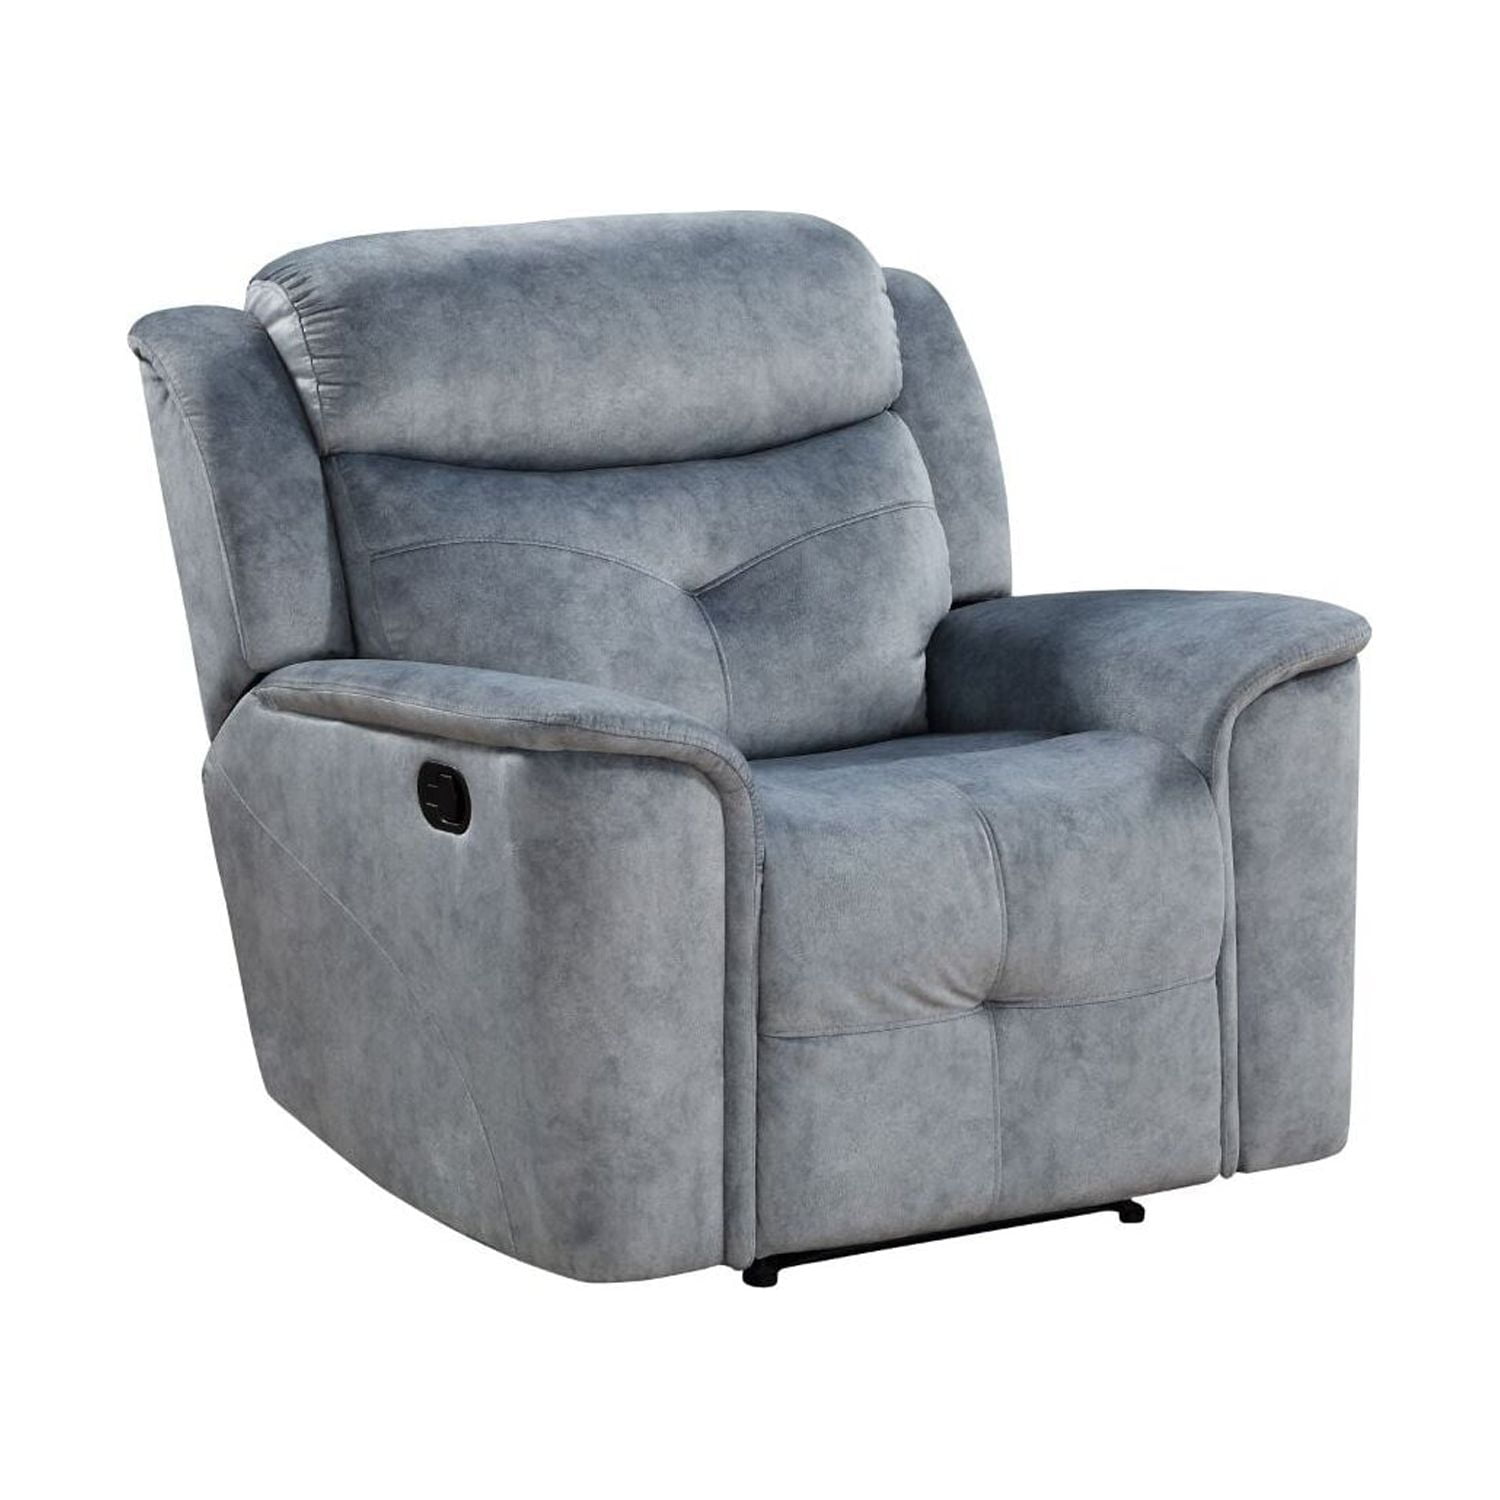 Picture of Acme Furniture 55032 39 x 39 x 39 in. Mariana Recliner, Silver Gray Fabric